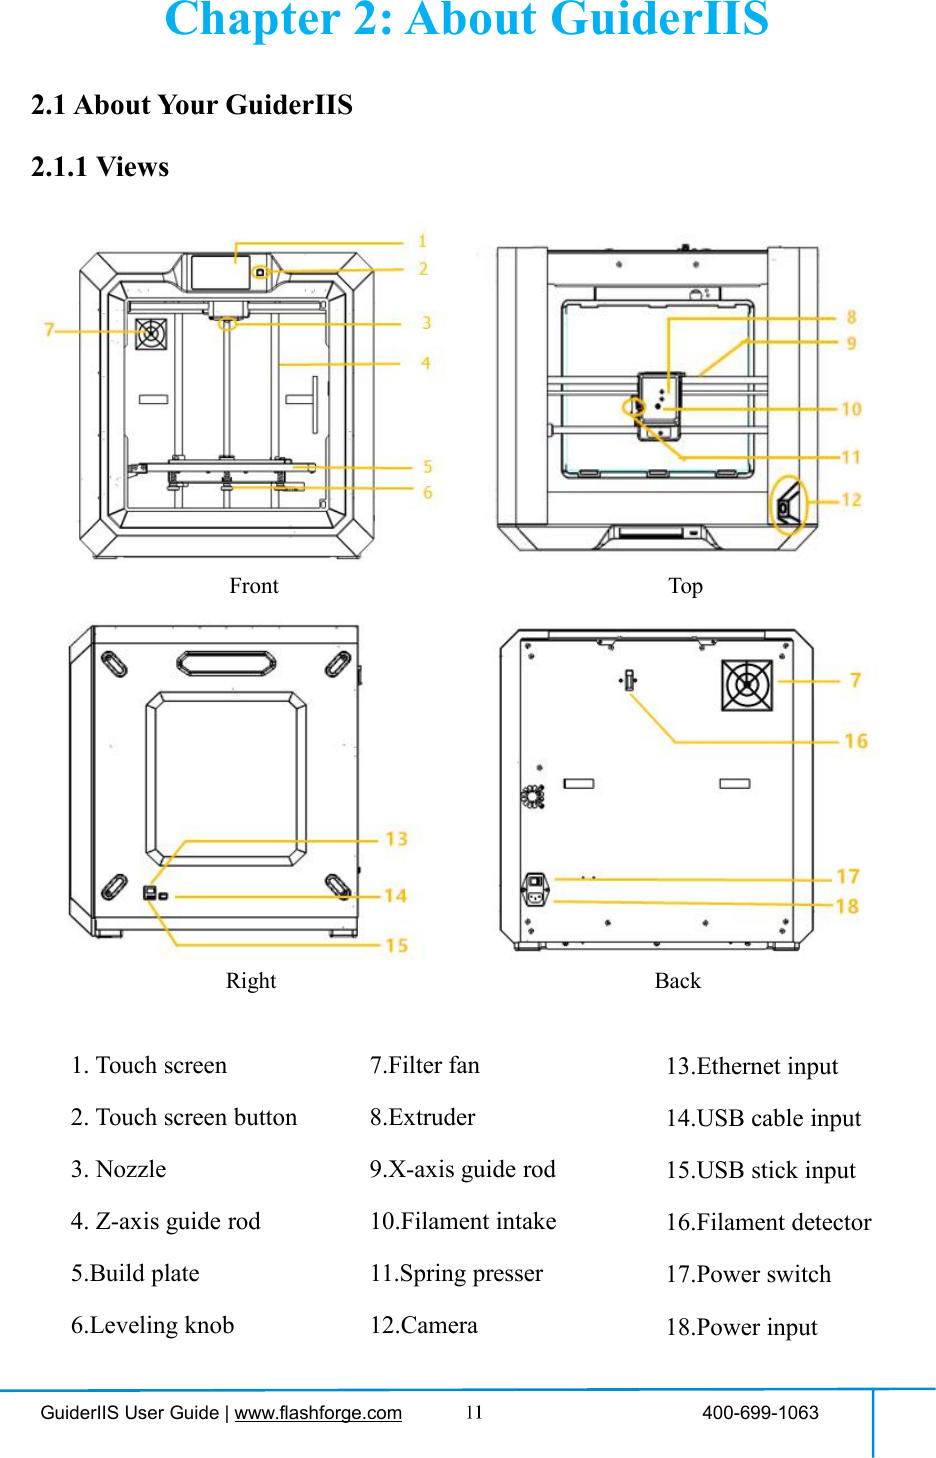 GuiderIIS User Guide | www.flashforge.com 400-699-1063Chapter 2: About GuiderIIS2.1 About Your GuiderIIS2.1.1 ViewsFront TopRight Back1. Touch screen2. Touch screen button3. Nozzle4. Z-axis guide rod5.Build plate6.Leveling knob13.Ethernet input14.USB cable input15.USB stick input16.Filament detector17.Power switch18.Power input7.Filter fan8.Extruder9.X-axis guide rod10.Filament intake11.Spring presser12.Camera